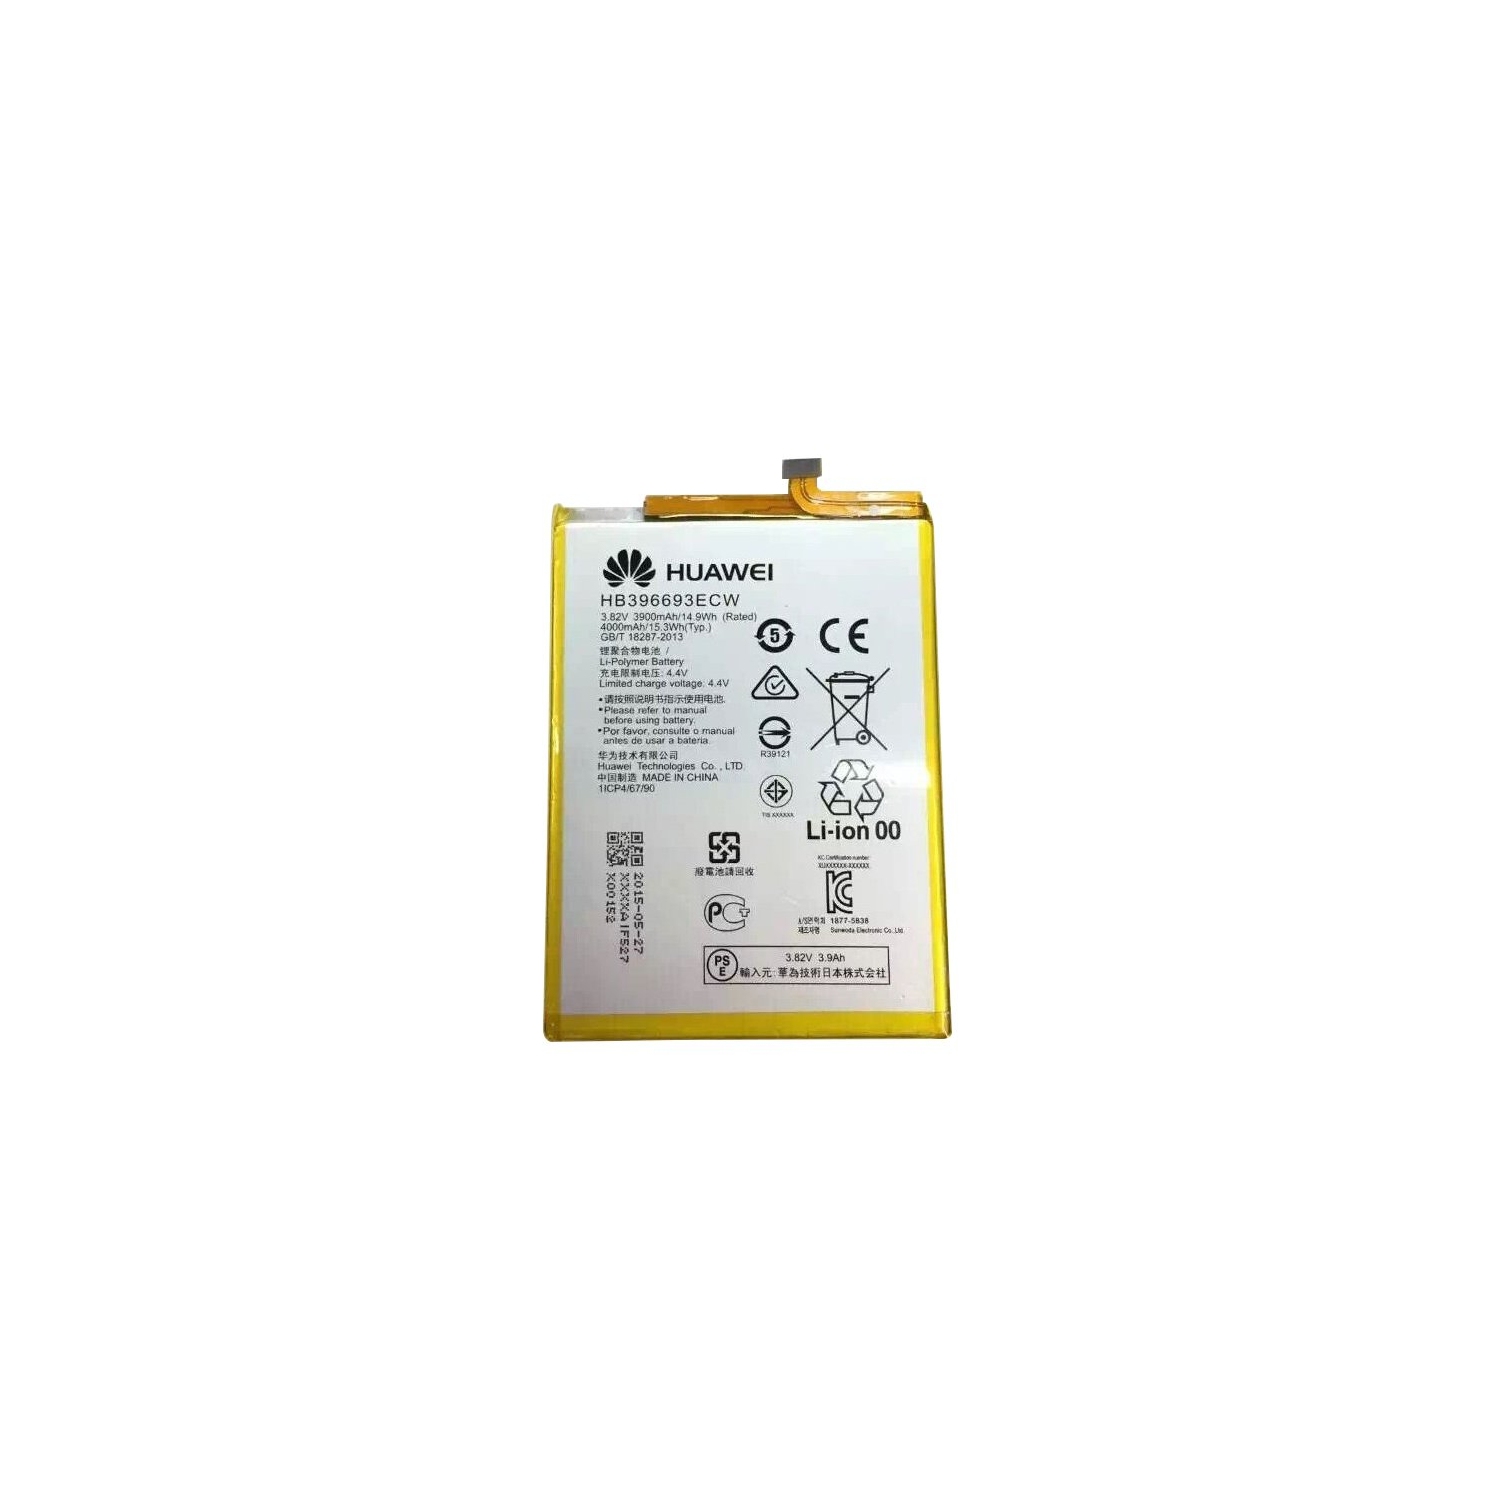 Replacement Battery for Huawei Ascend Mate 8, HB396693ECW